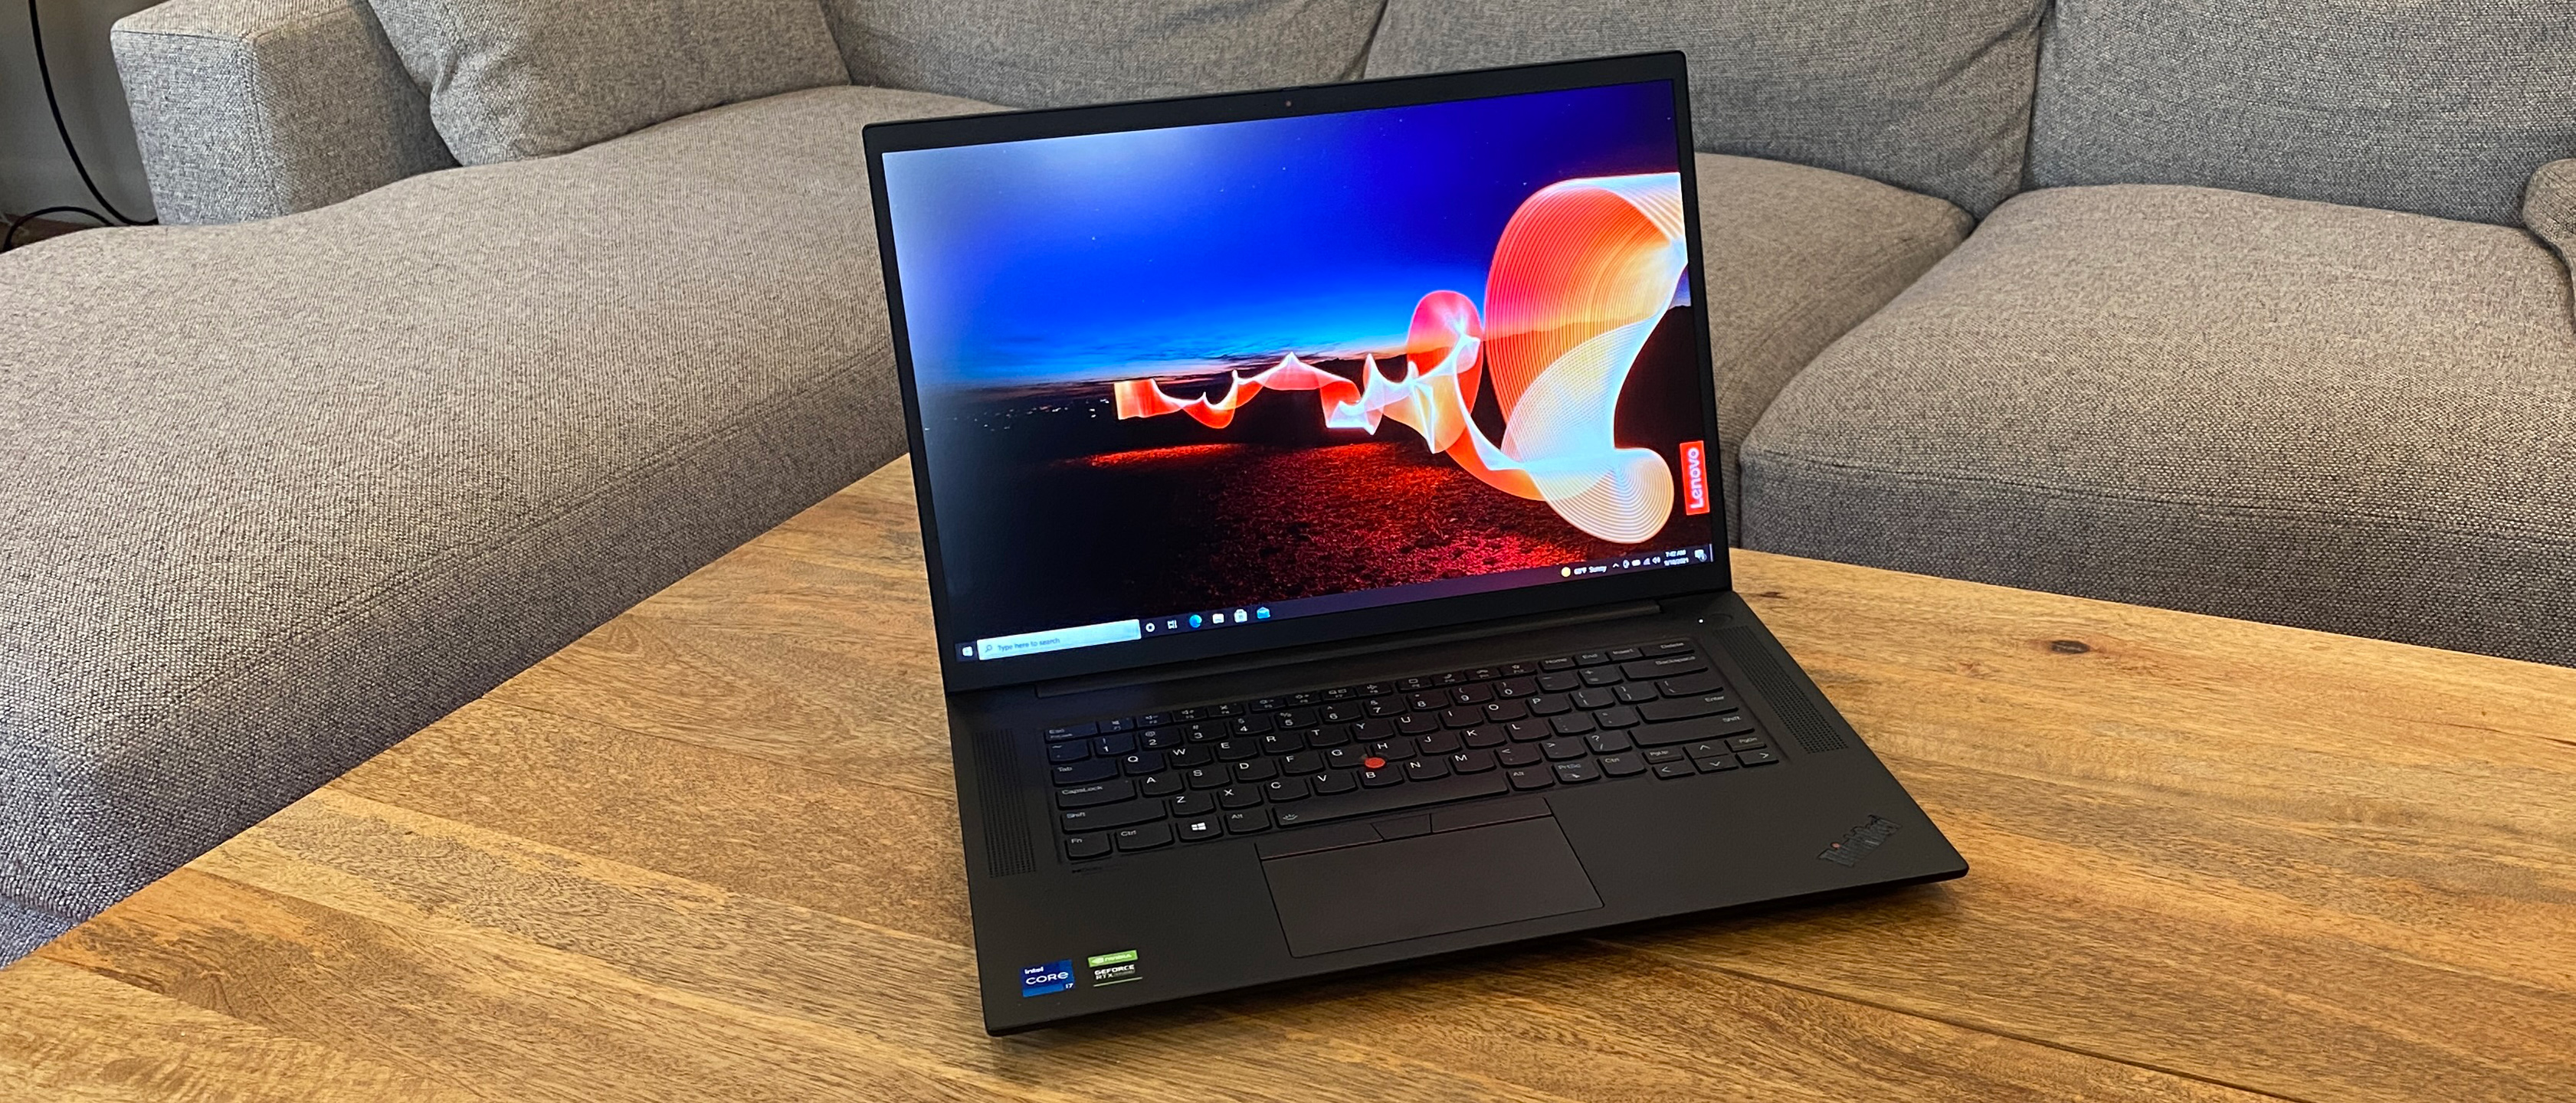 Lenovo ThinkPad X1 Extreme Gen 4 Review: Bigger (Screen) Is Better 